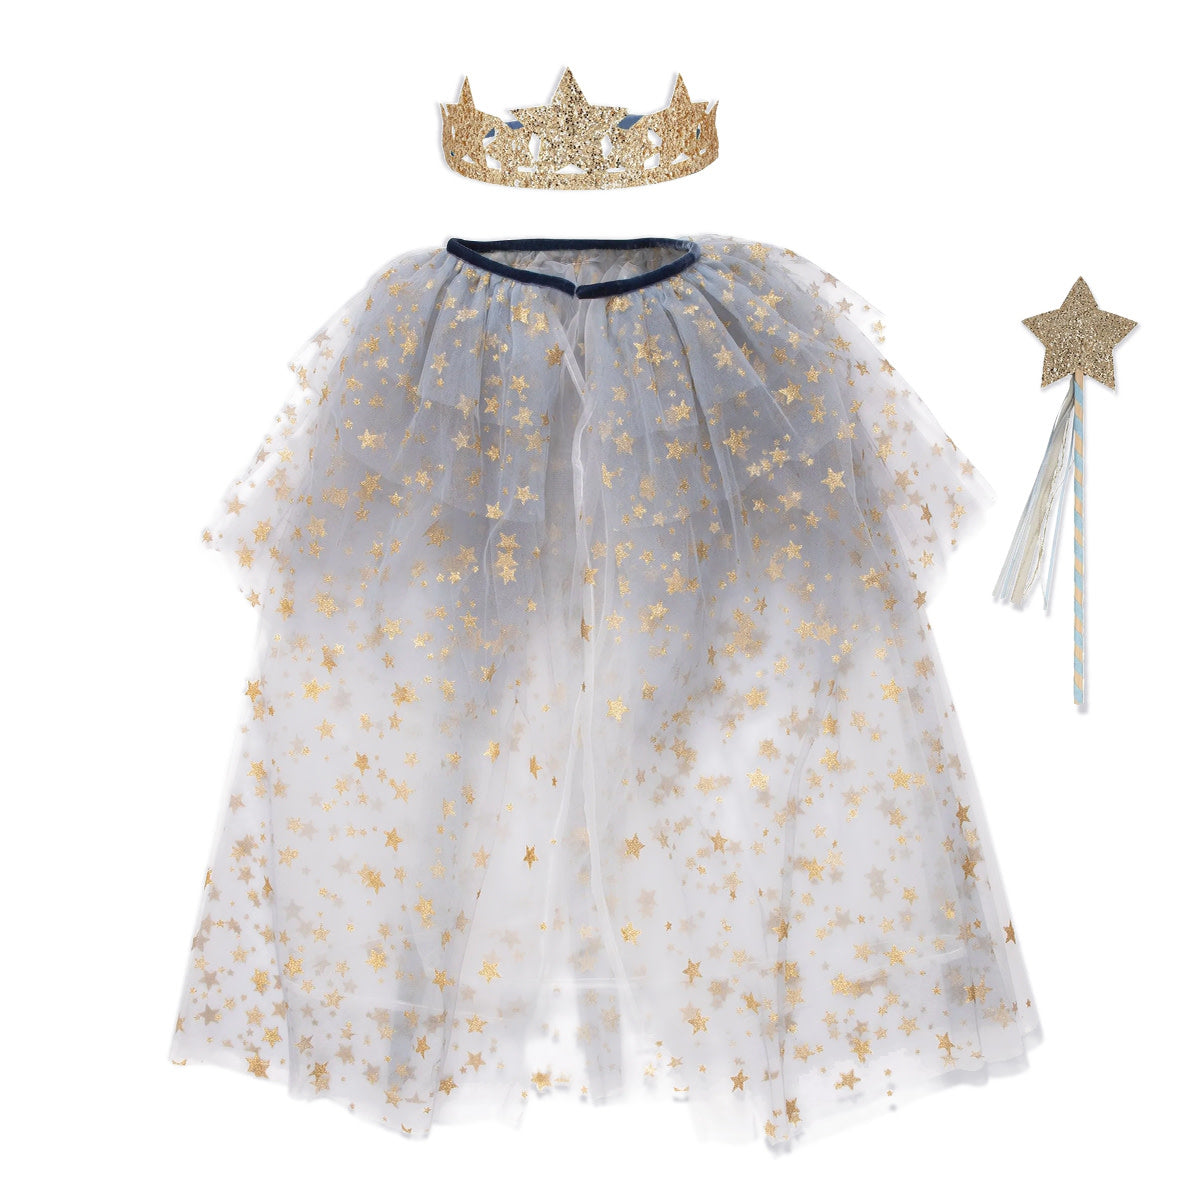 Layered Tulle Star Costume